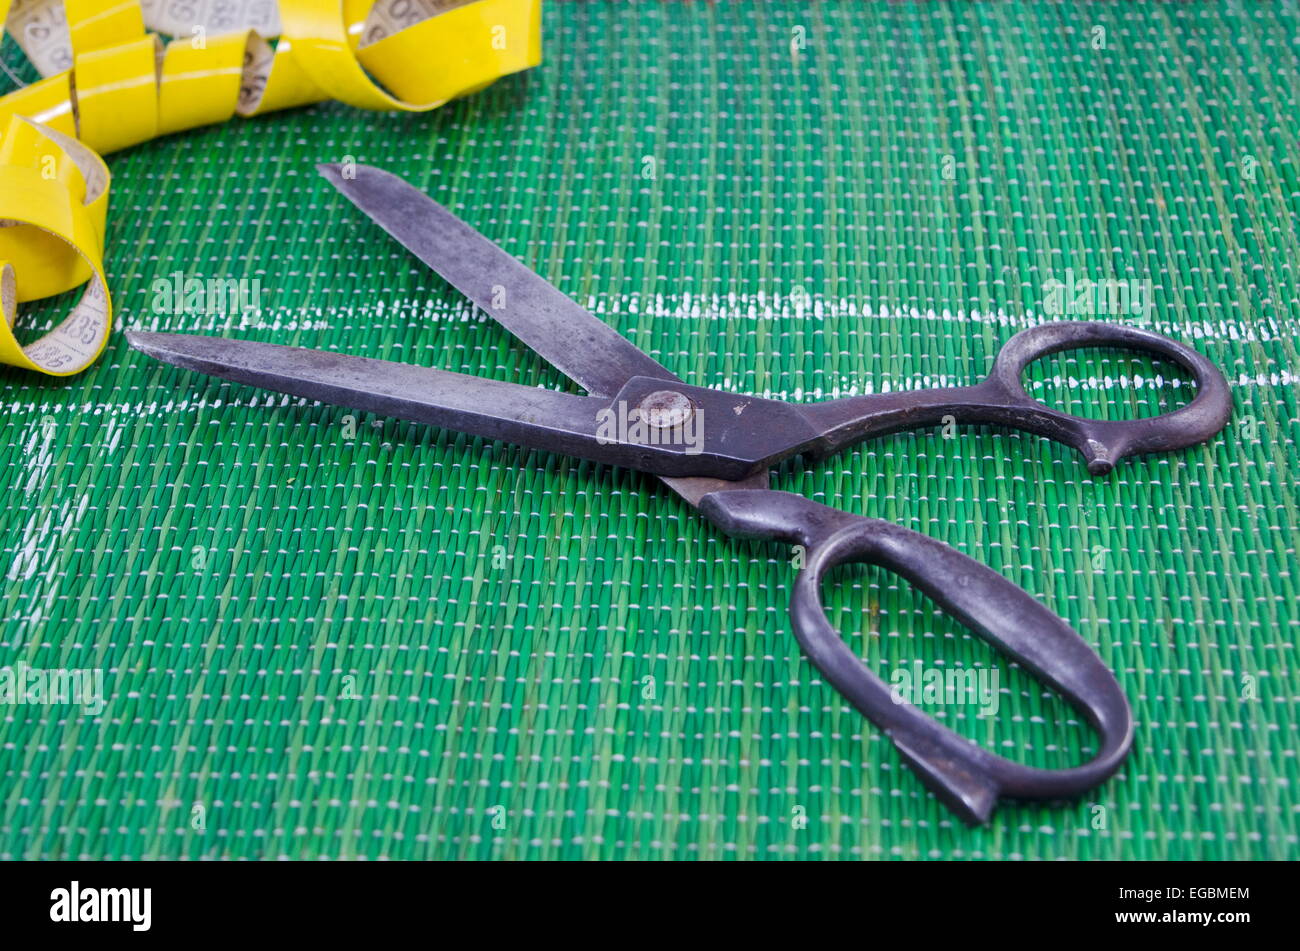 Equipment For Designing Clothes, Measuring Tape, Wooden Scale And Scissors  On Black Fabric Stock Photo, Picture and Royalty Free Image. Image 53653392.